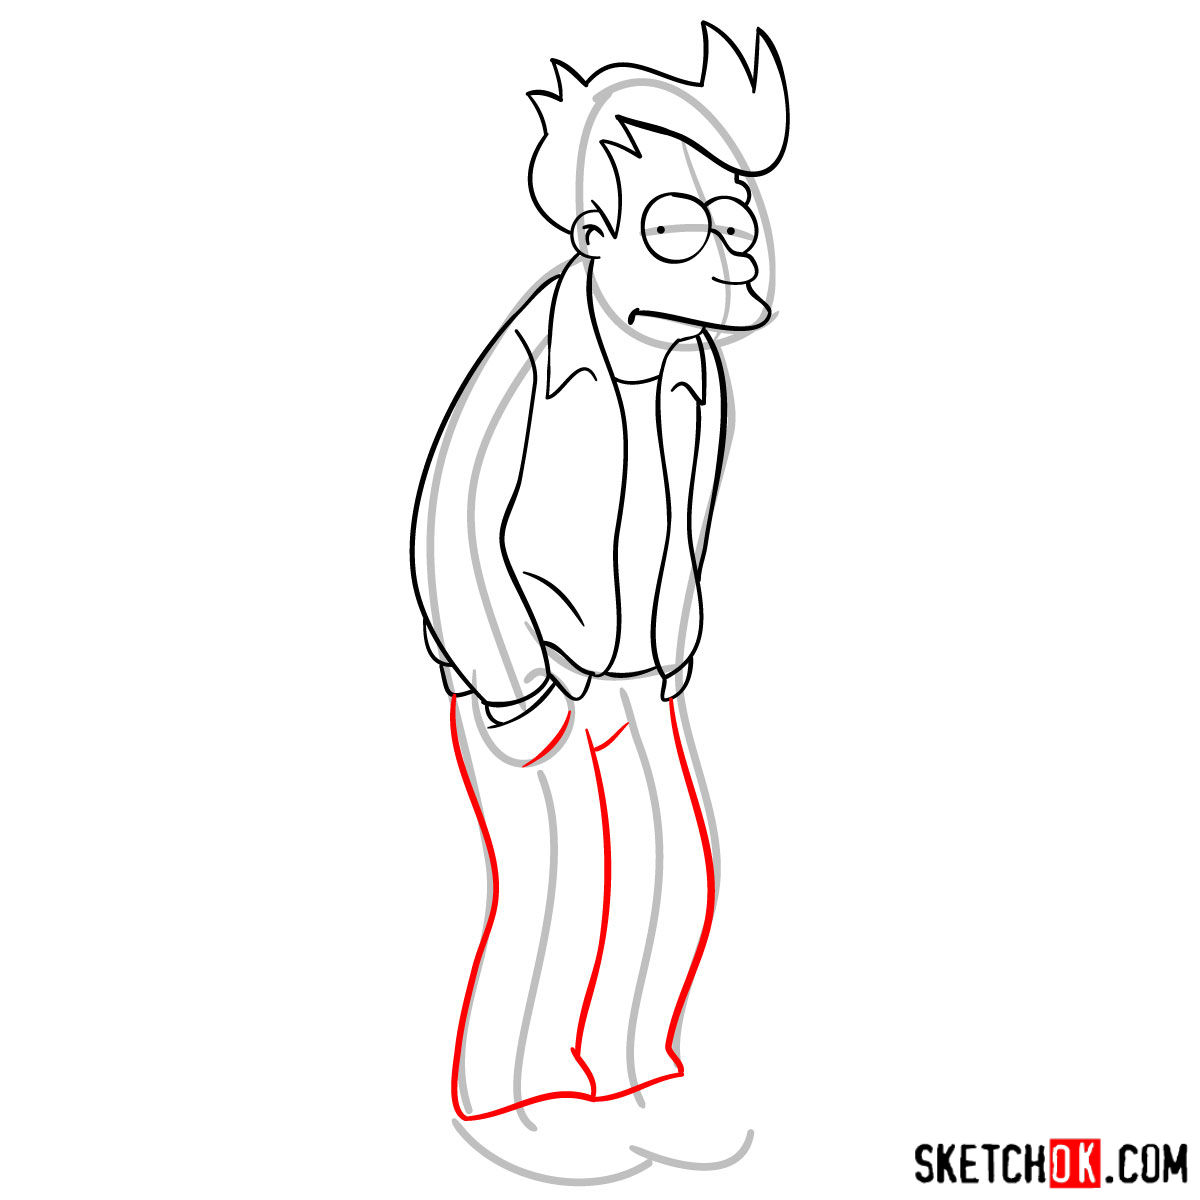 How to draw Philip J. Fry step by step - step 08